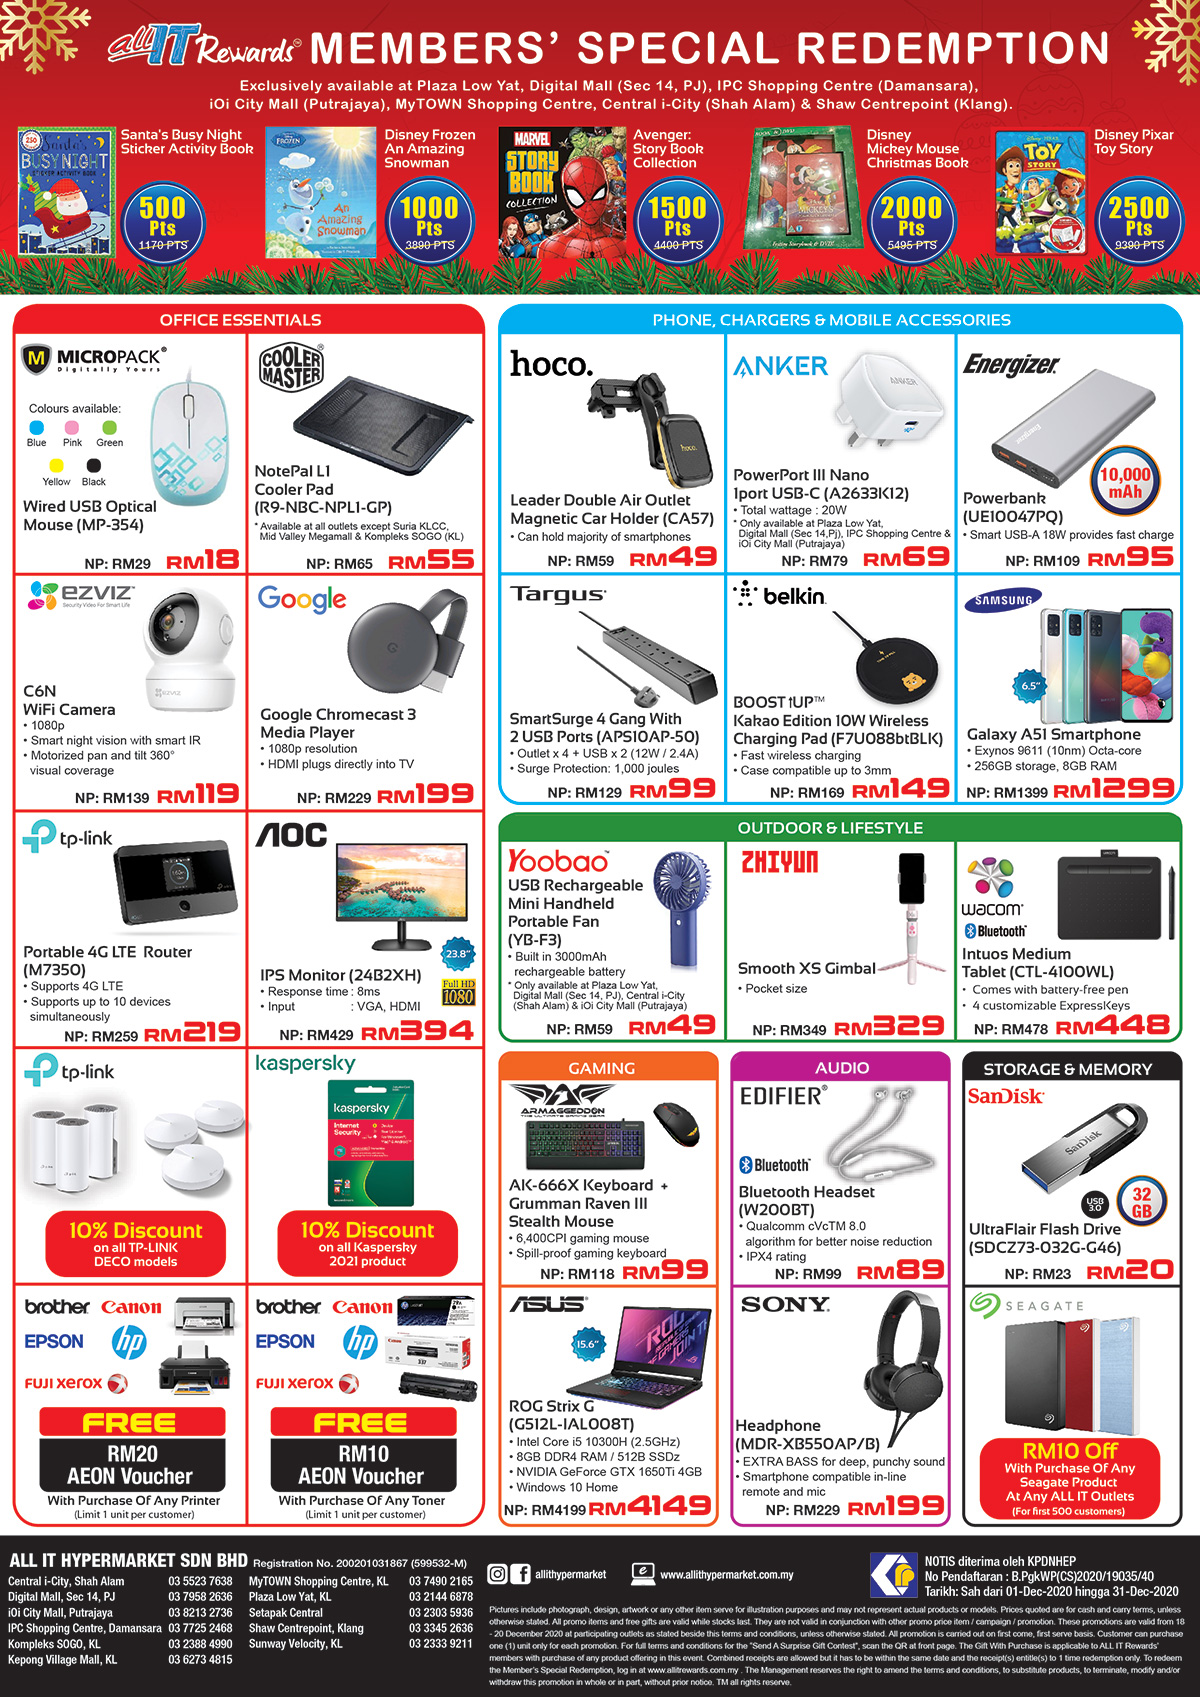 ALL-IT-Xmas-sale_2020_a4_2_back-01 - Audio System & Visual System Cameras Computer Accessories Electronics & Computers Home Appliances IT Gadgets Accessories Kuala Lumpur Laptop Location Mobile Phone Putrajaya Selangor Tablets Warehouse Sale & Clearance in Malaysia 